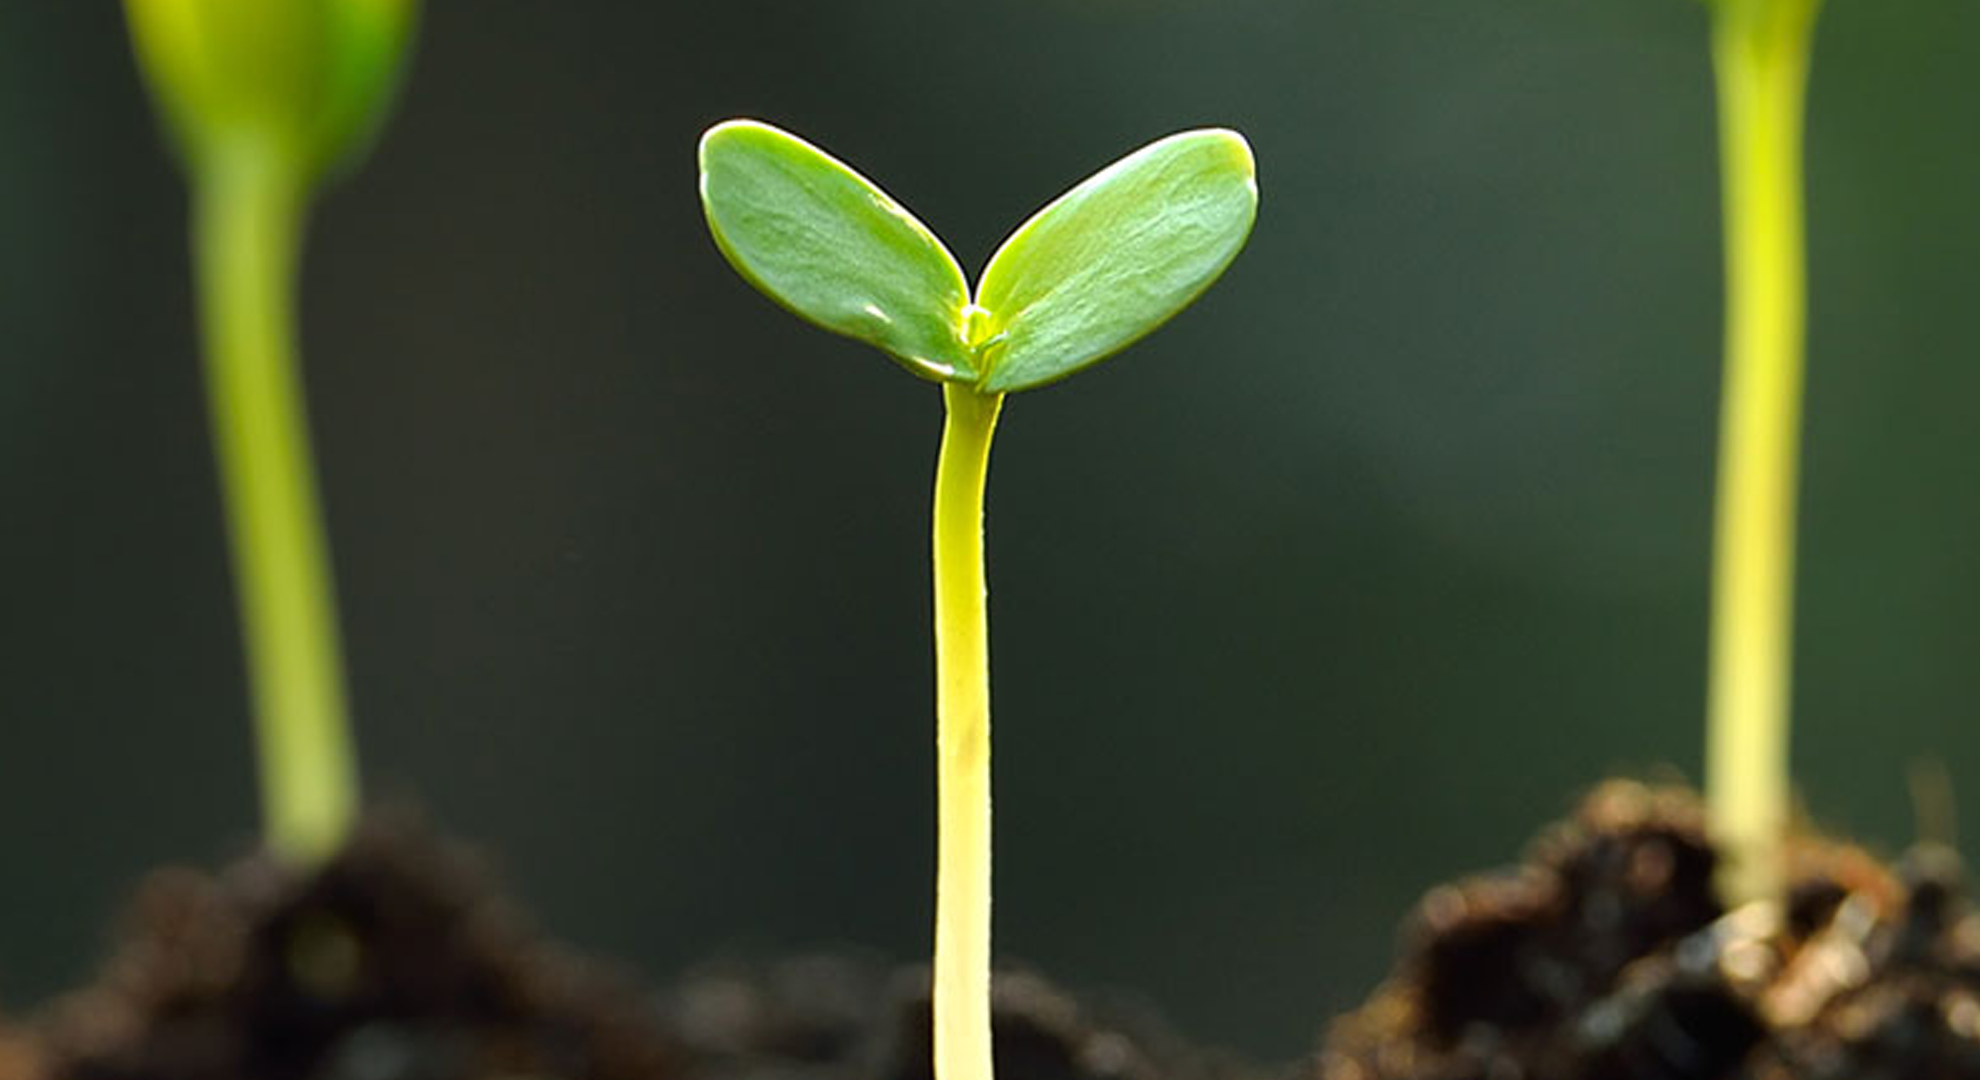 A young seedling growing in soil